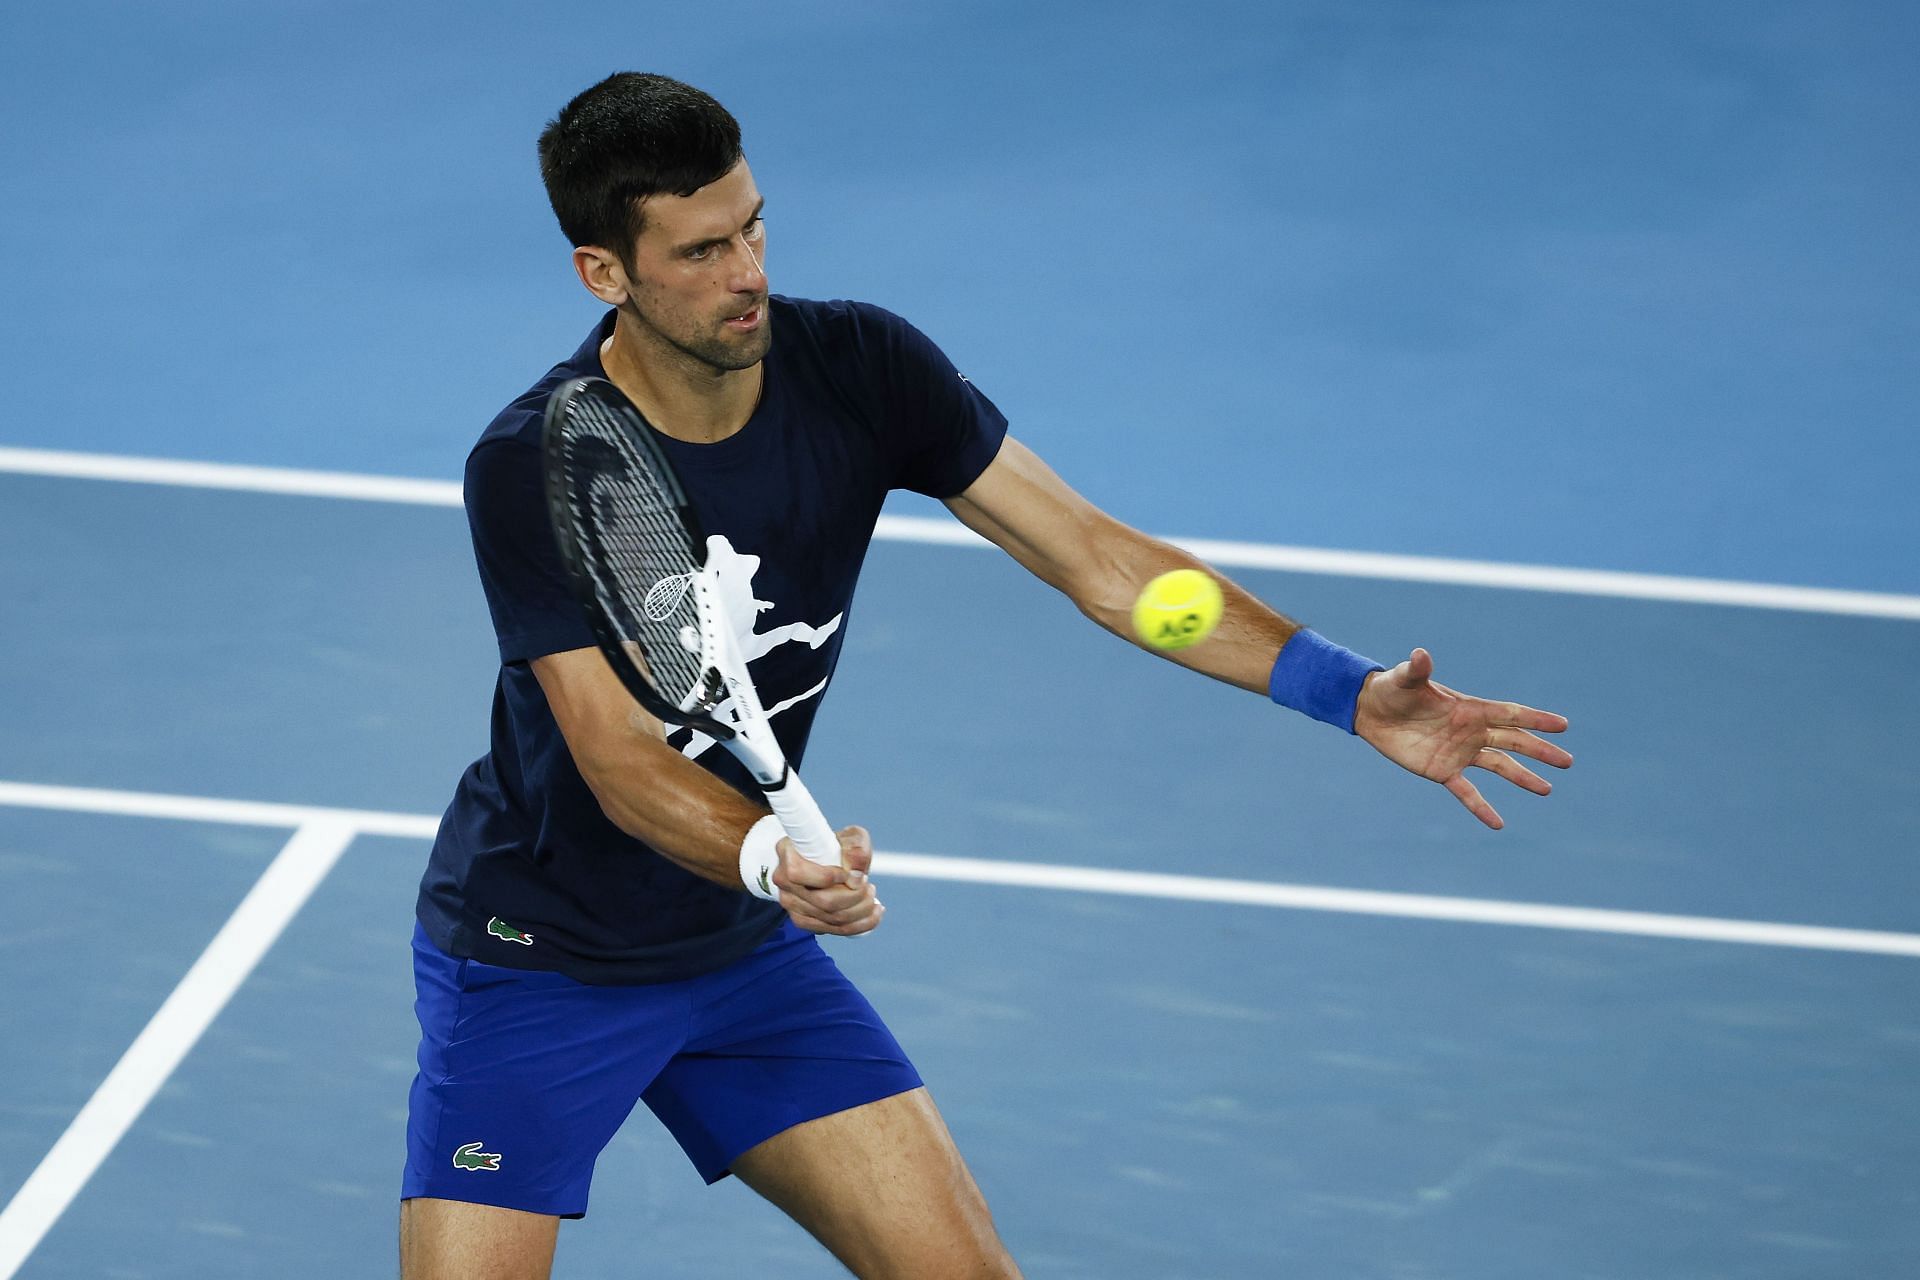 Novak Djokovic plays a forehand during a practice session ahead of the 2022 Australian Open